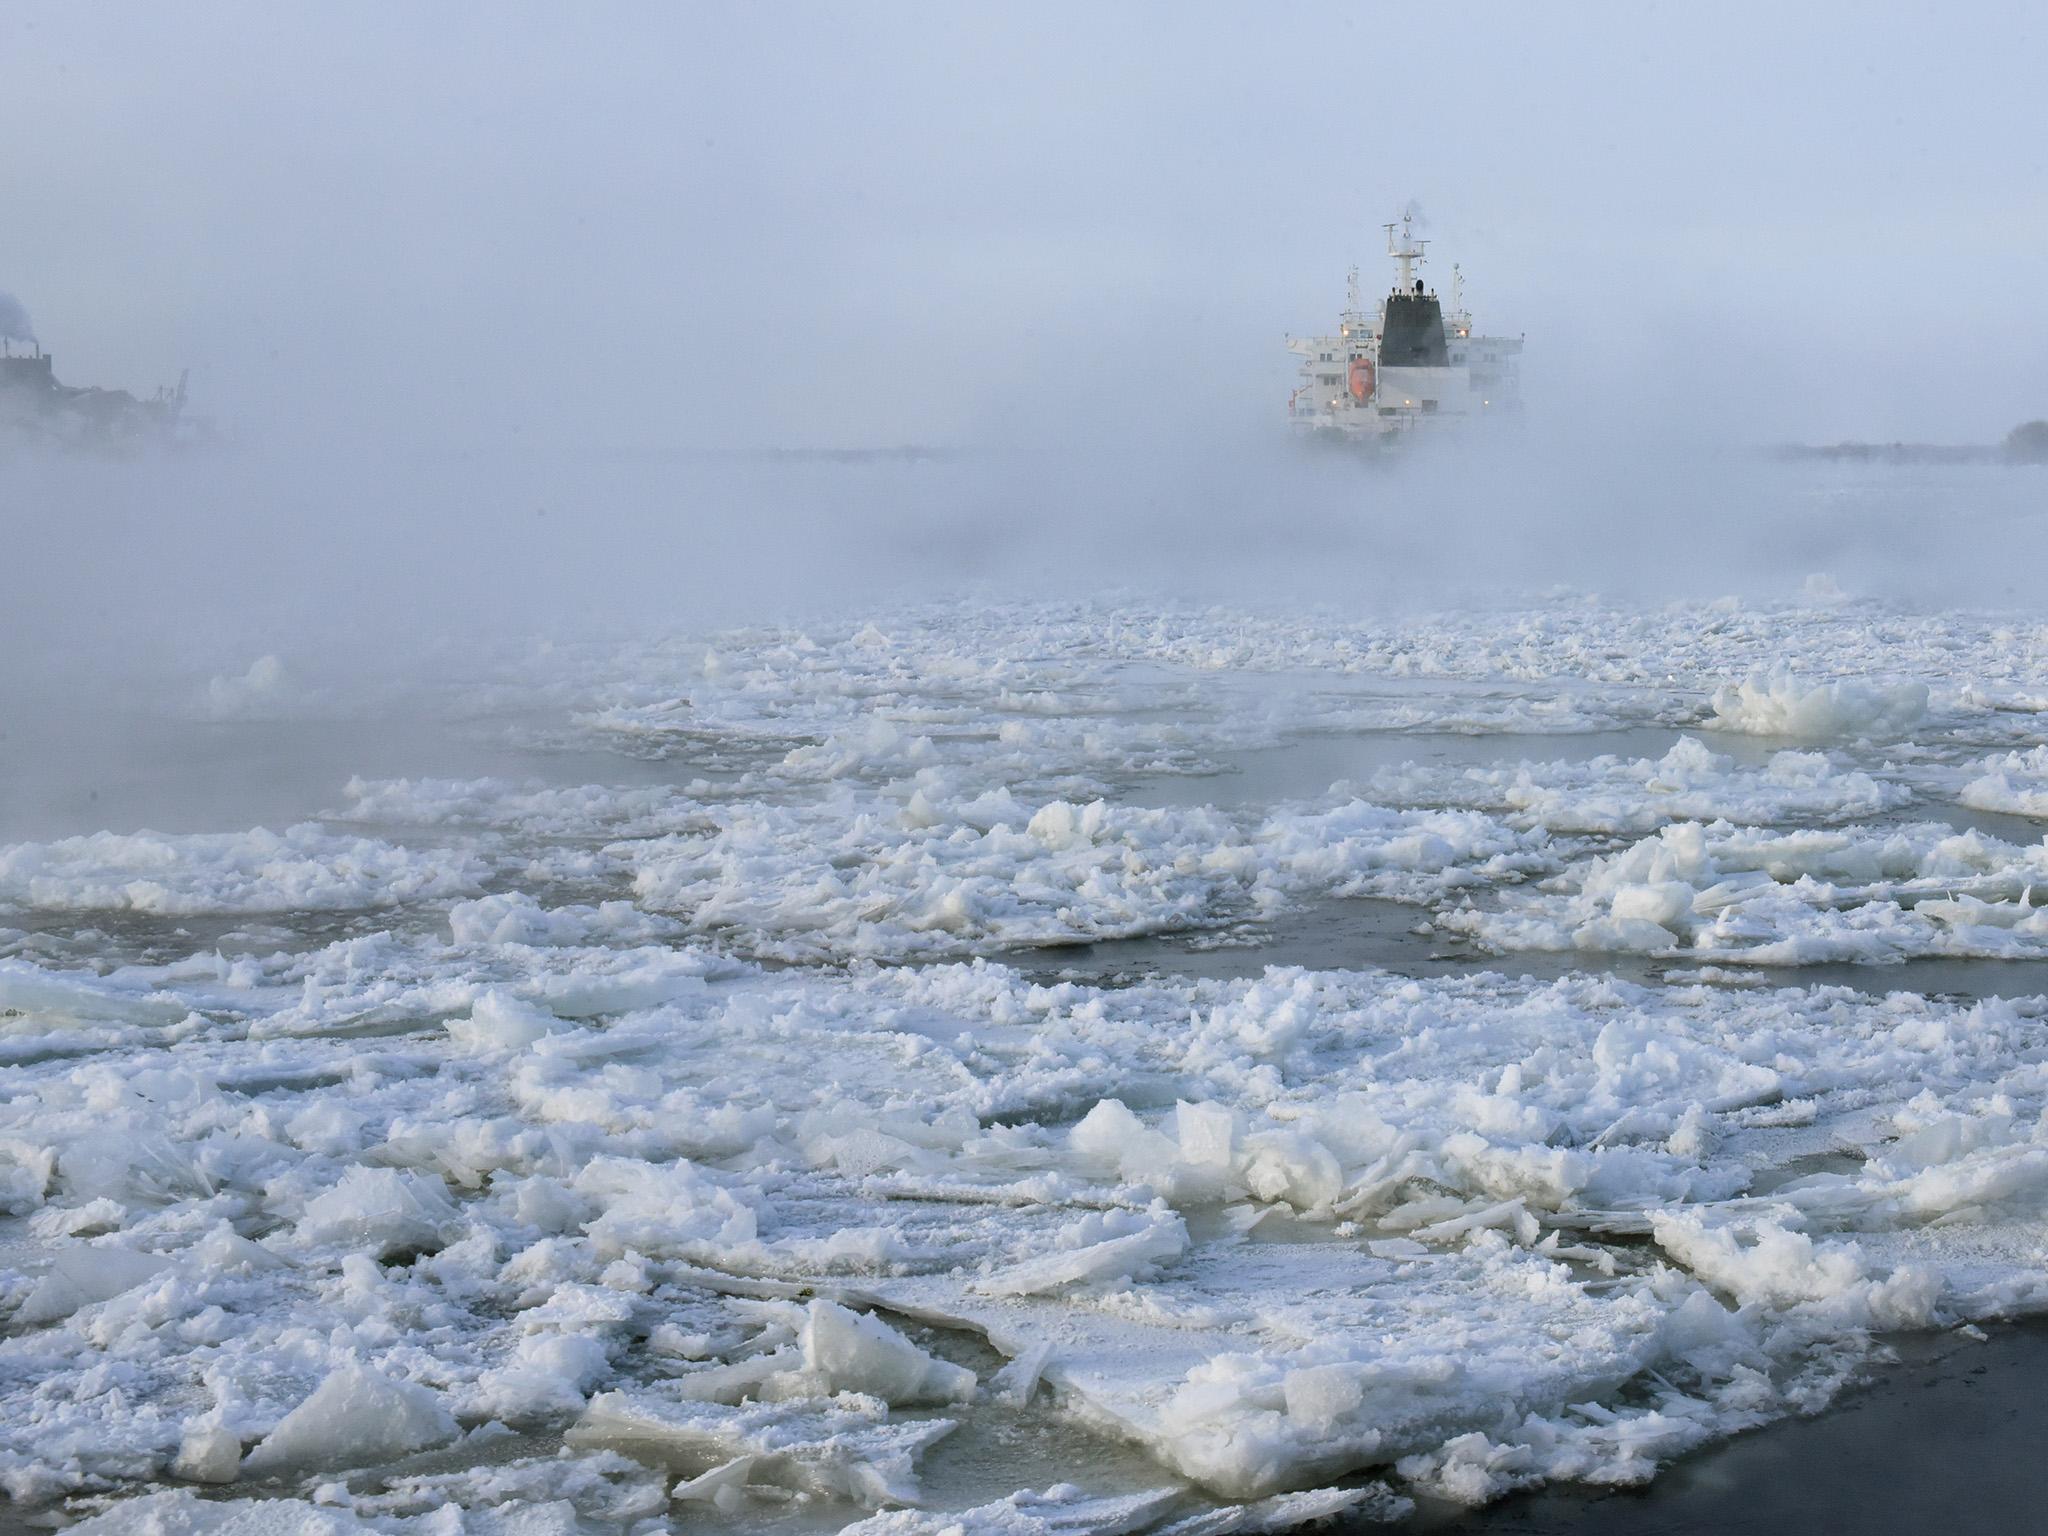 For the very first time, a Russian tanker has traversed the Northern Sea Route in winter without an icebreaker